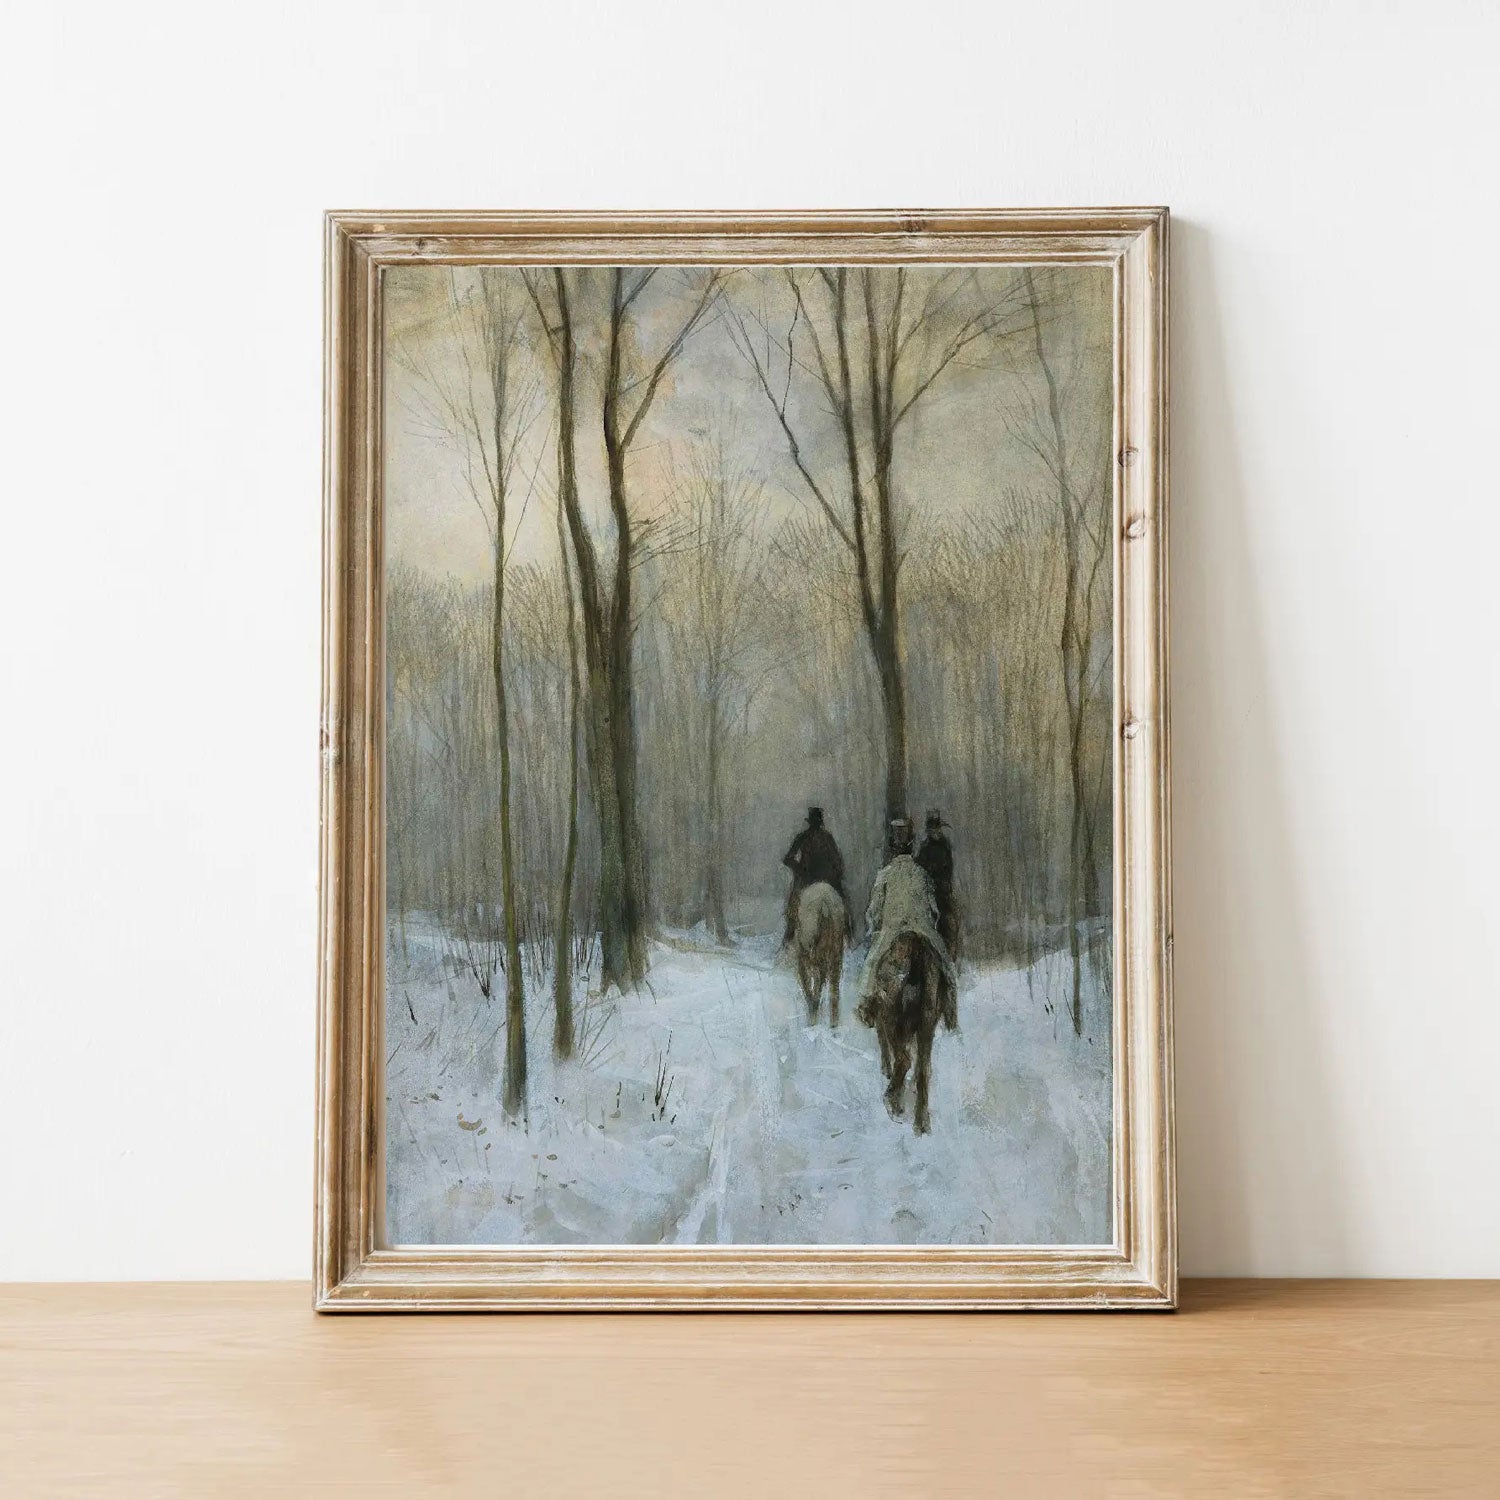 You can almost hear the snow crunching underfoot in this enchanted print. This Quiet Winter Trail is a reproduction of a vintage painting. It is printed on high quality card stock with archival ink. Original art has been digitally retouched to preserve characteristics, grain and cracks. Image size: 10"x 8". No frame included. 